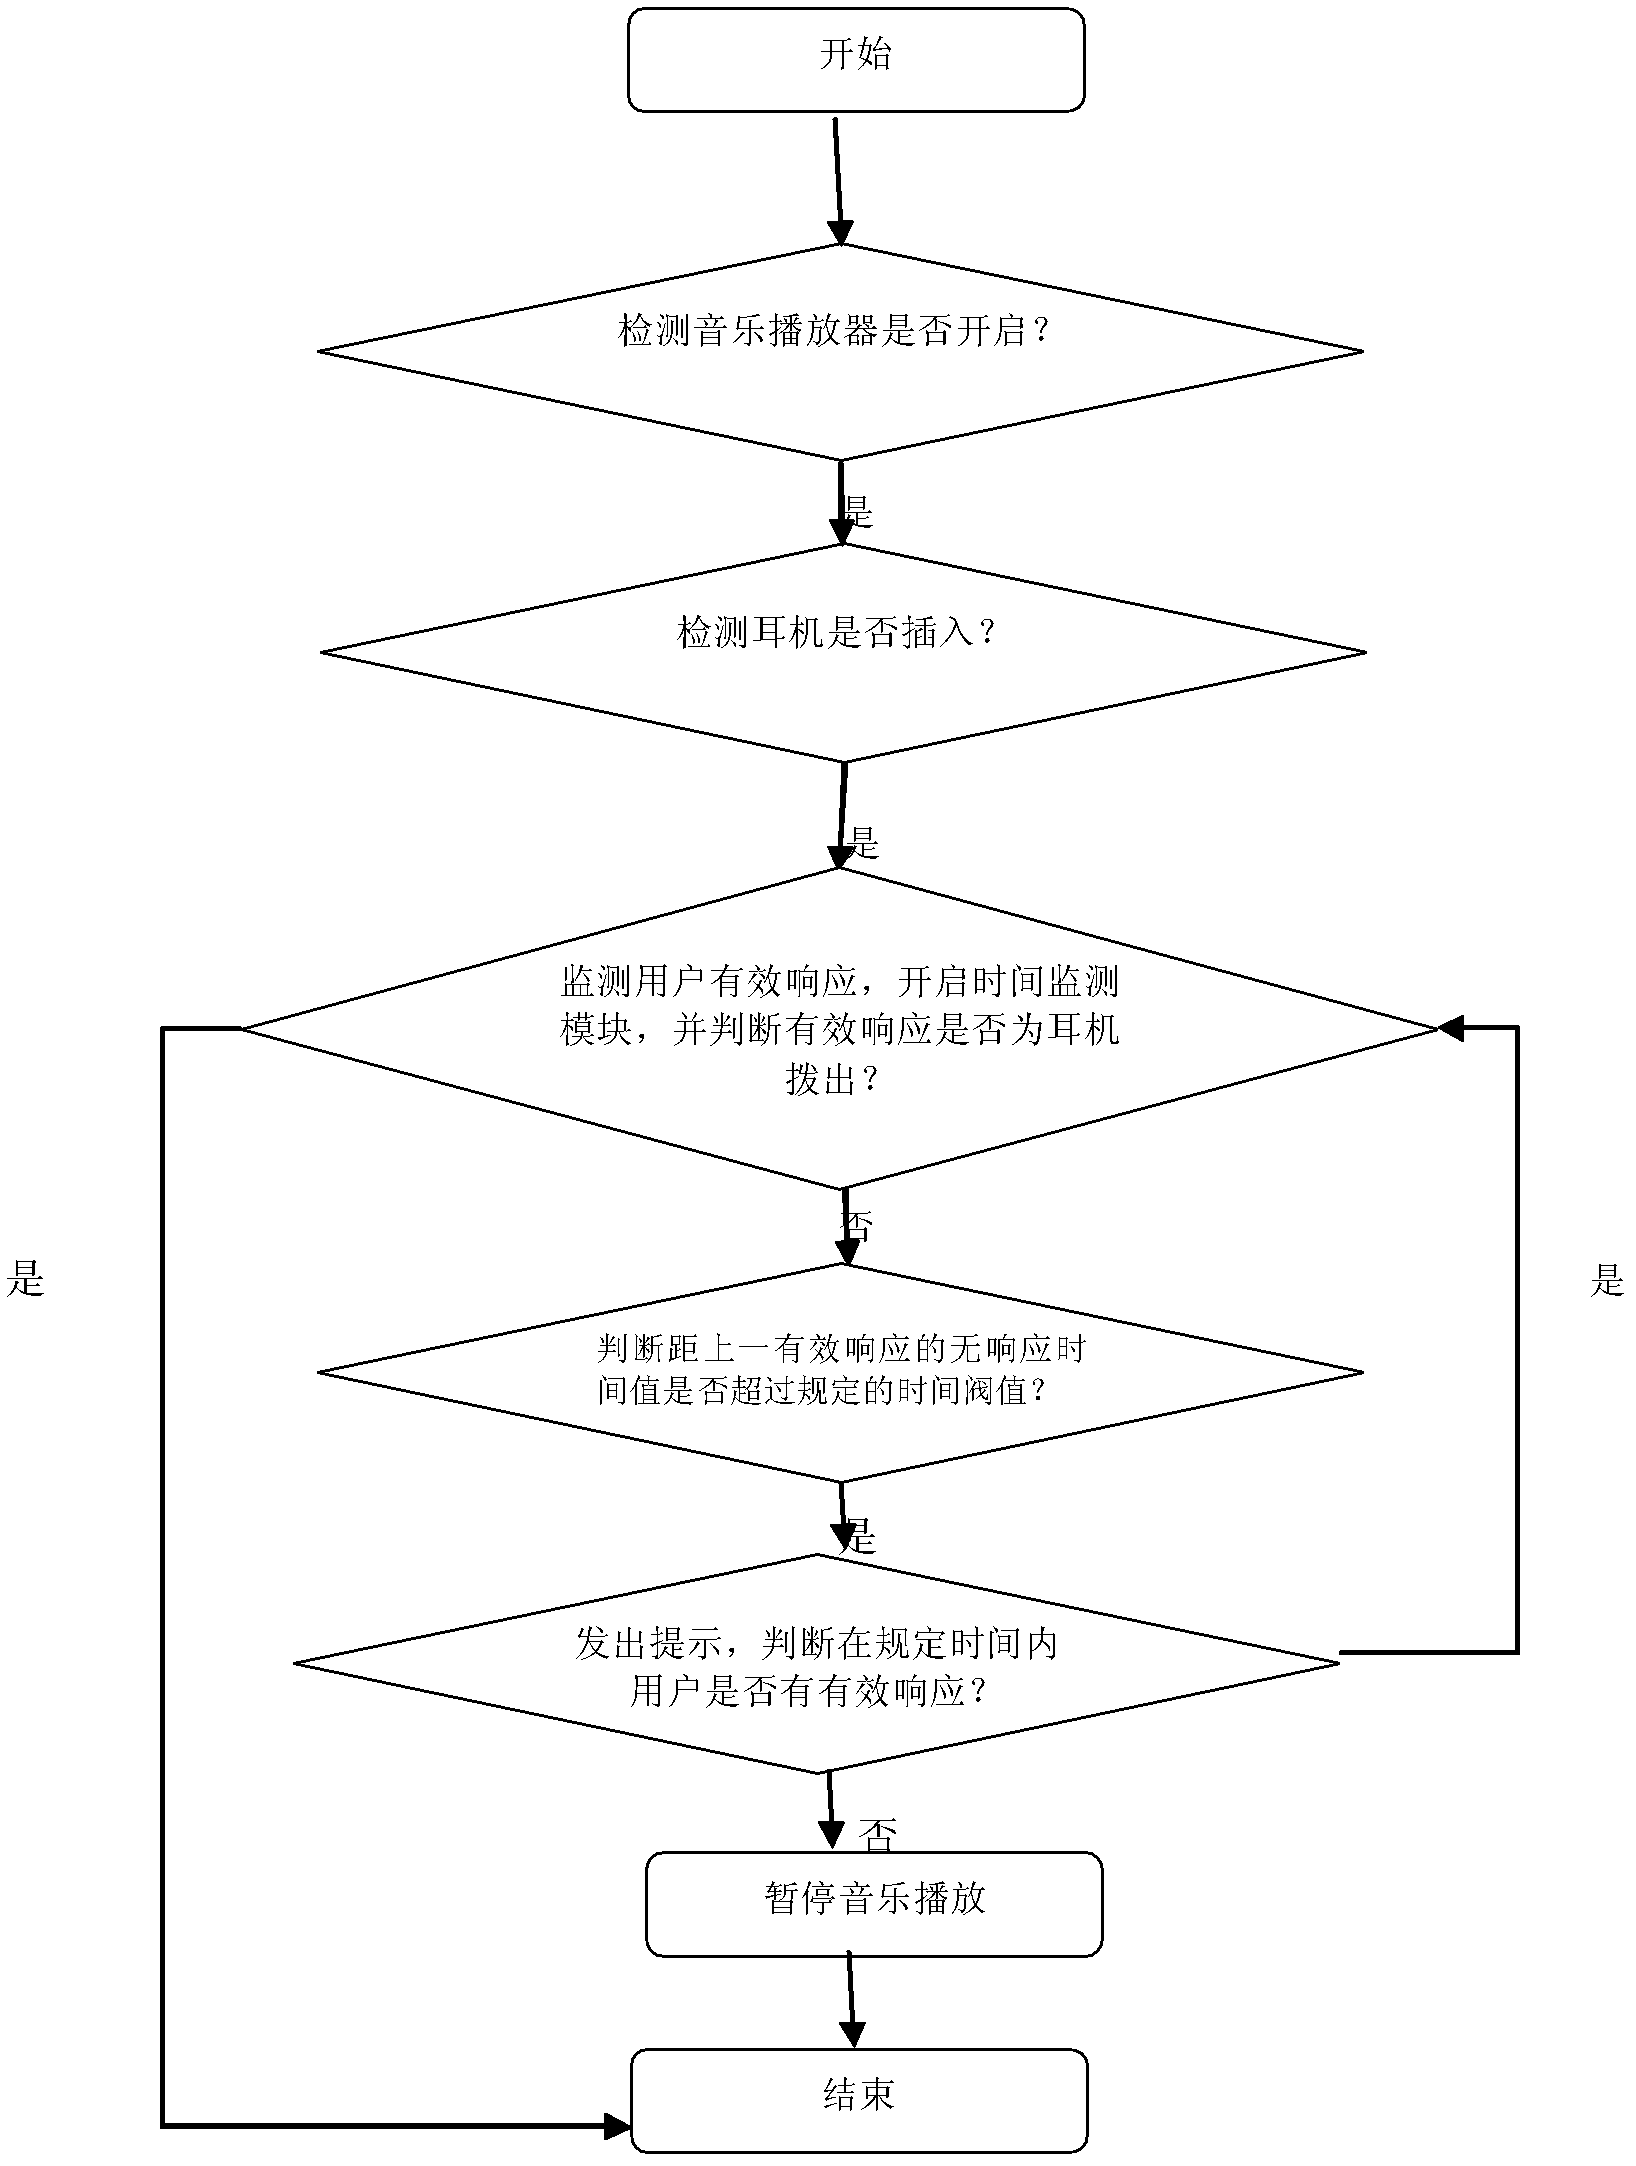 Terminal and method for automatically pausing music play function during sleep time of user